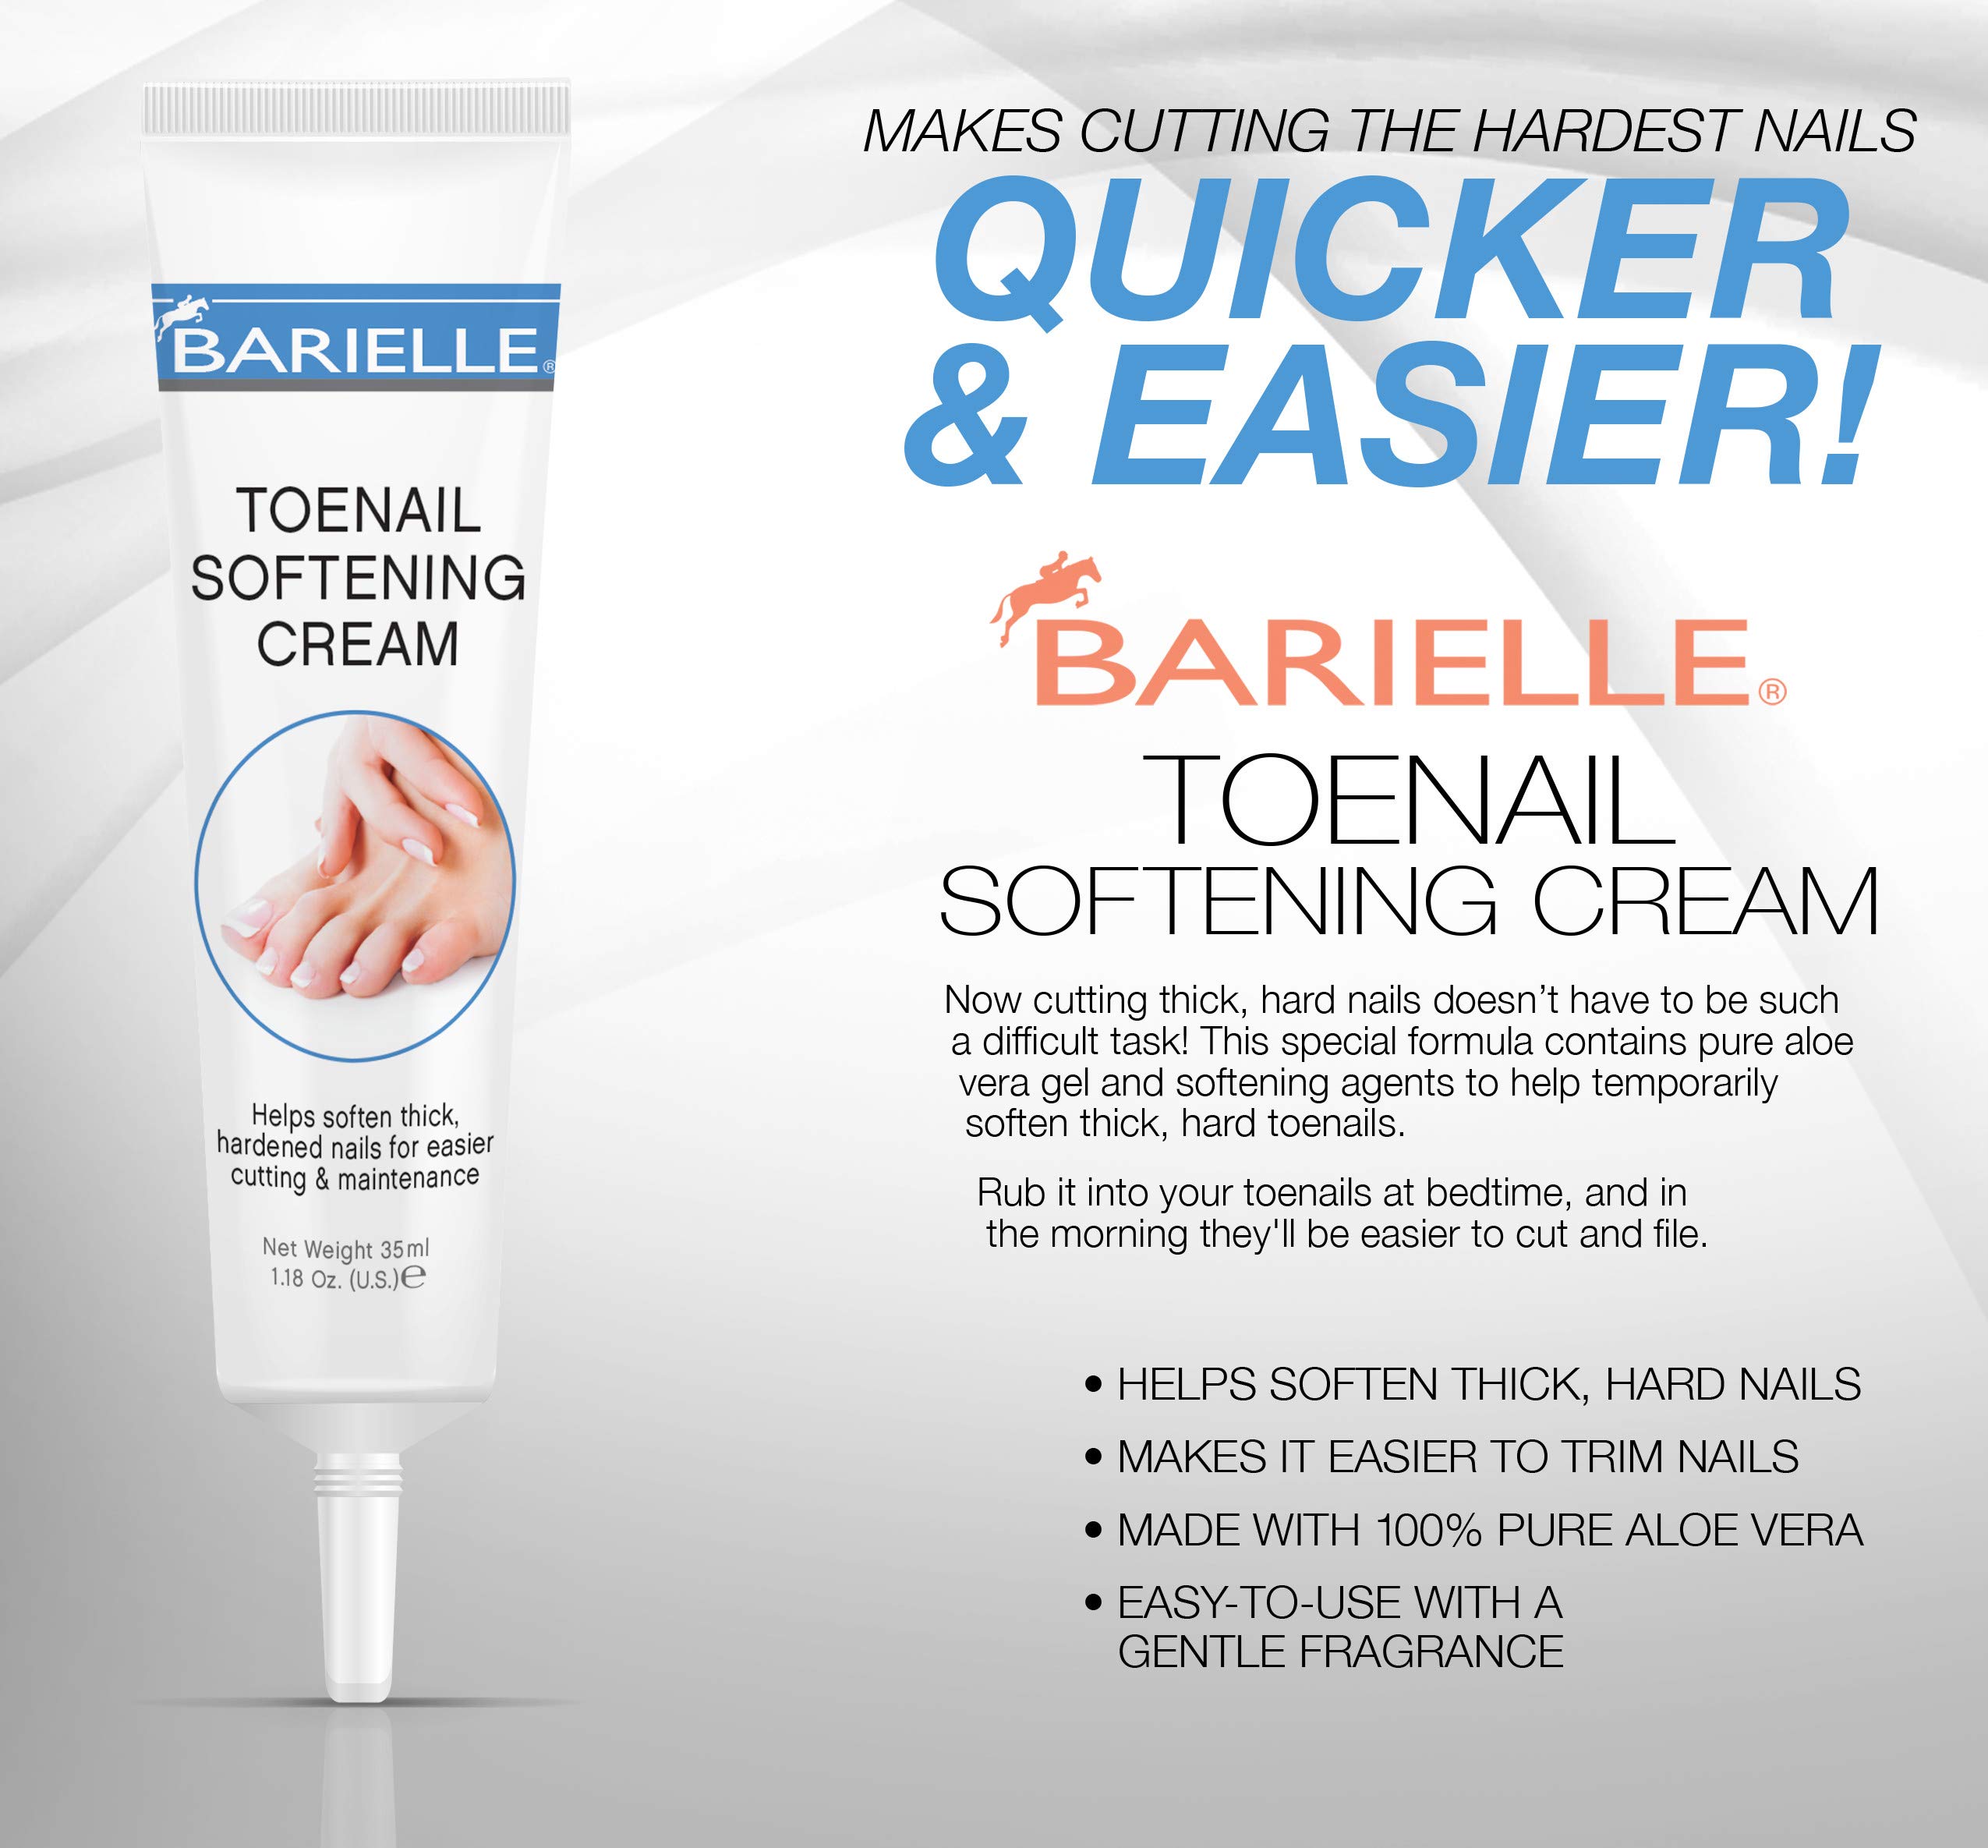 Barielle Toenail Softening Cream 1.18 oz. 2-PC BOXED SET with Barille Nail Clippers